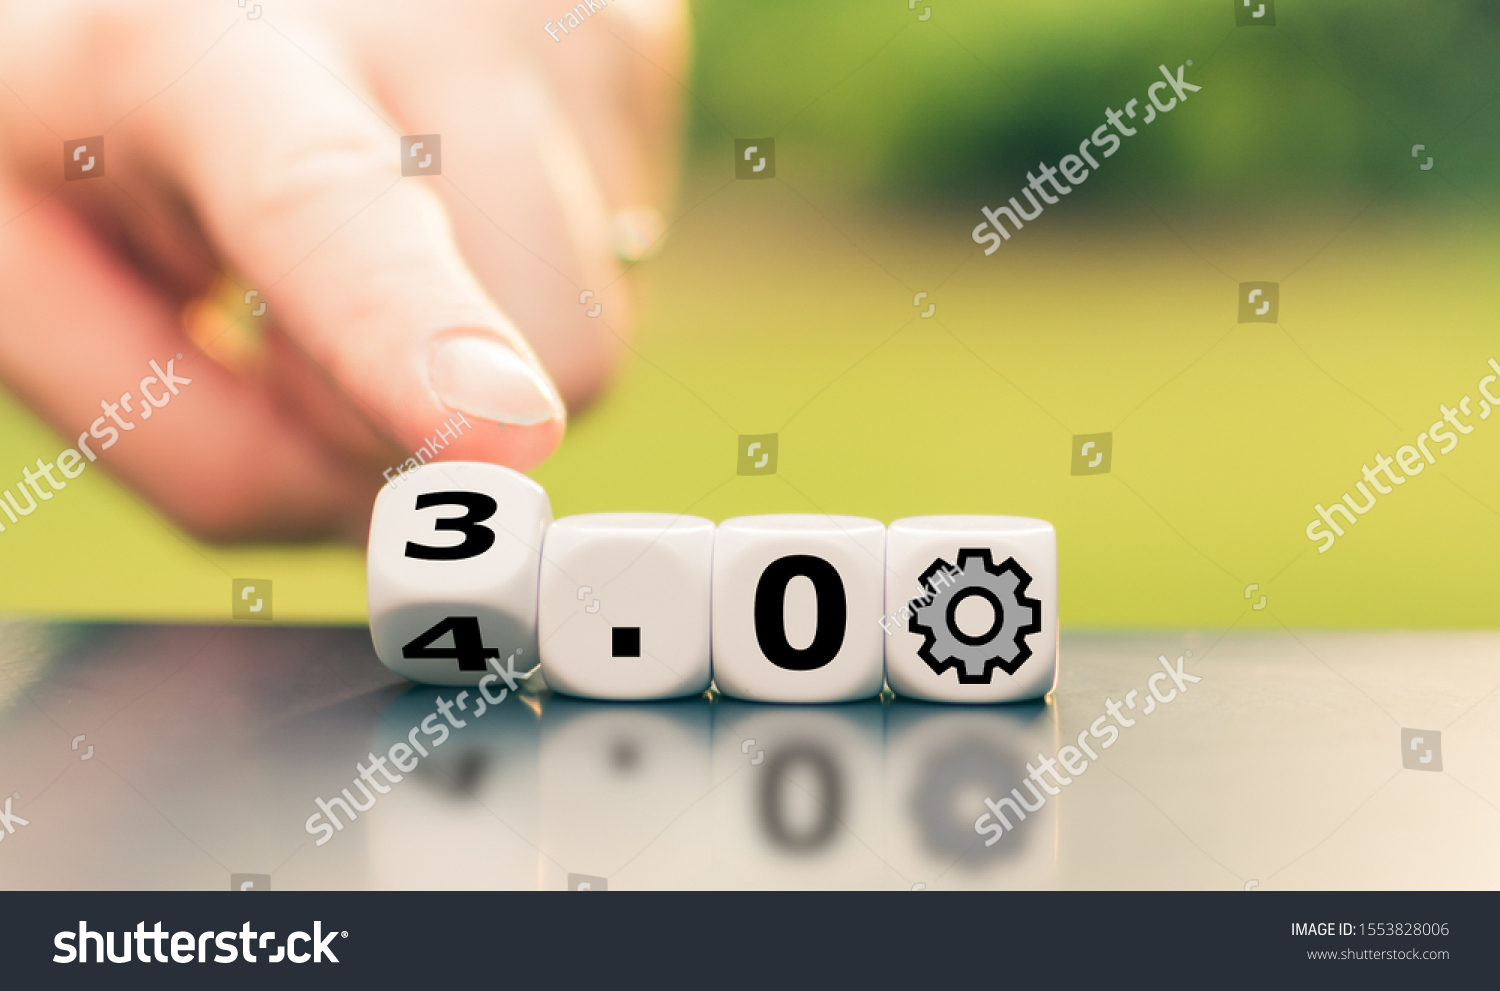 Hand is turning a dice and changes the expression "Industry 3.0" to "Industry 4.0"	 #1553828006